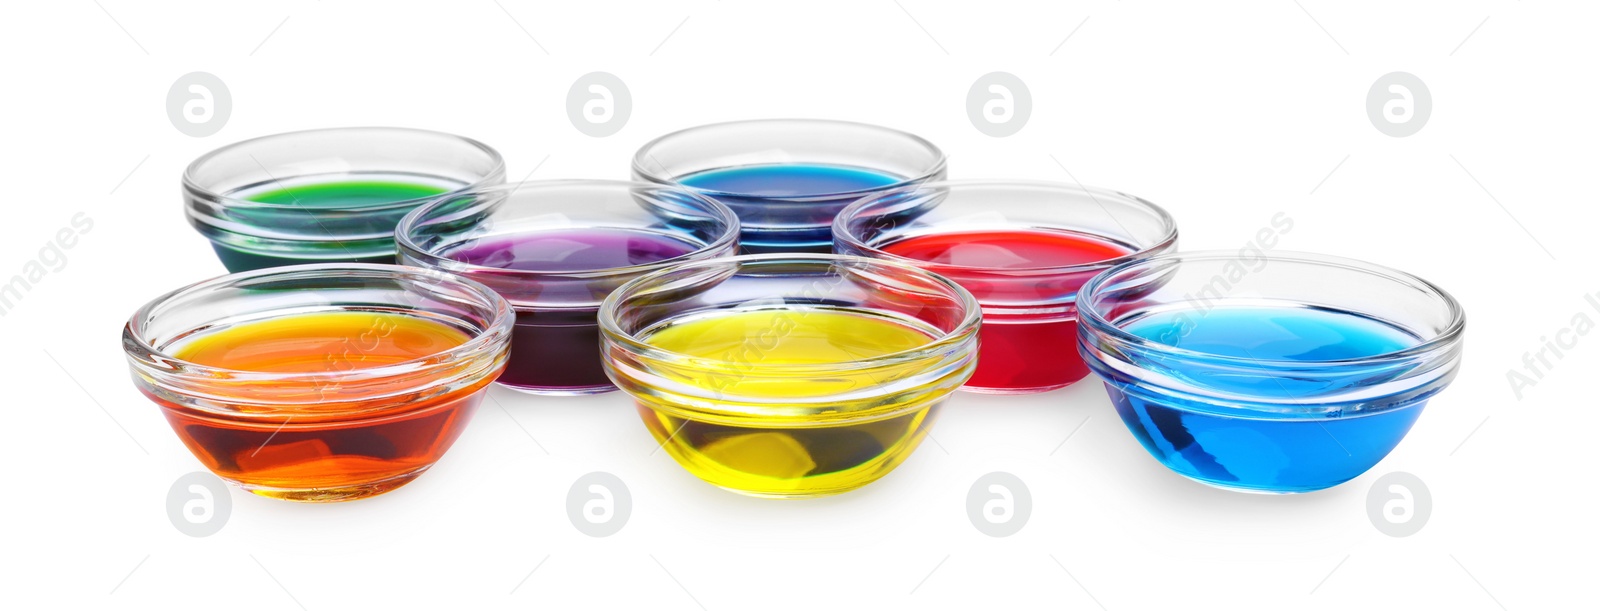 Photo of Glass bowls with different food coloring on white background